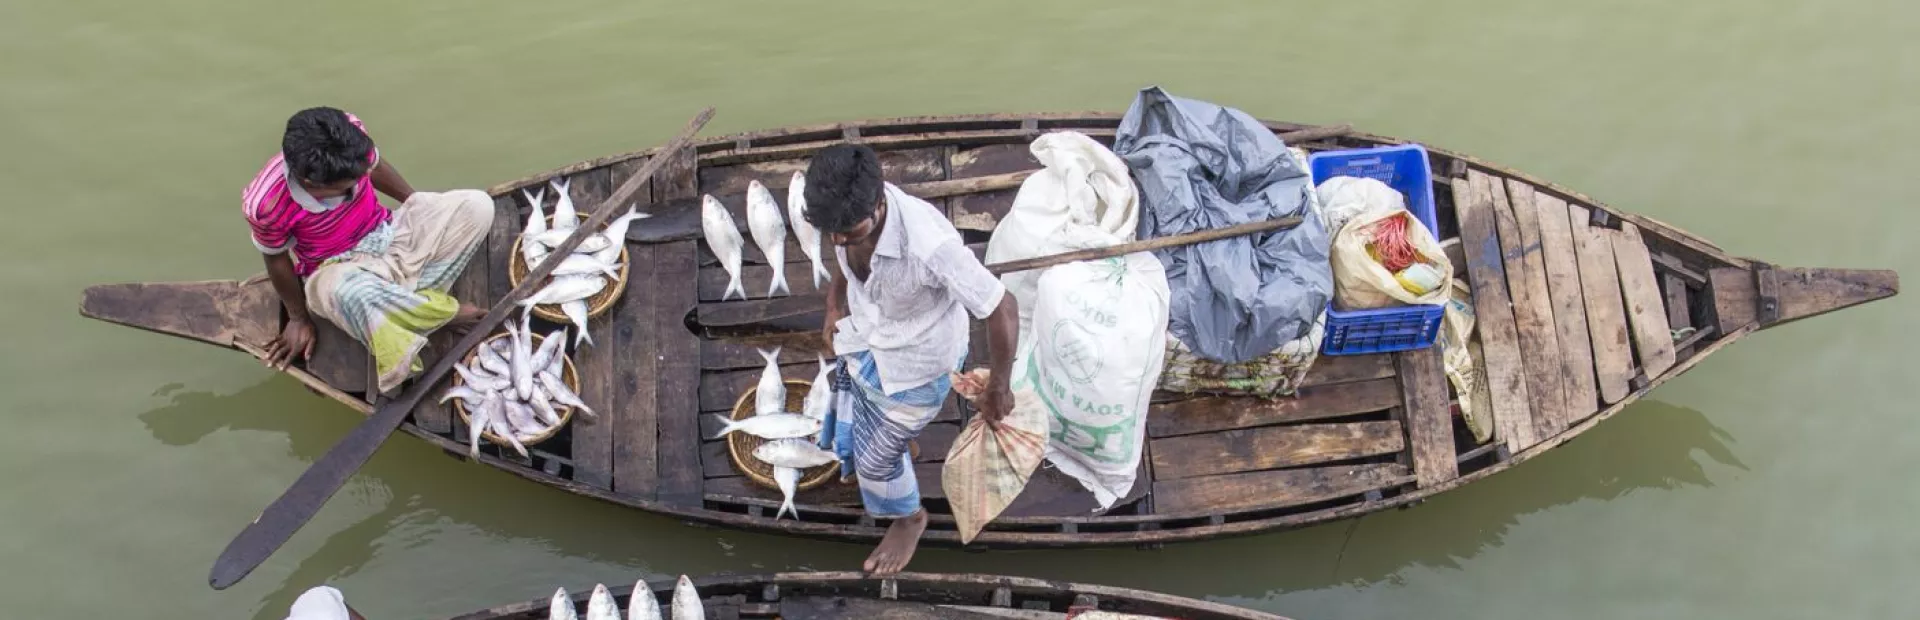 Fishers on a boat in Bangladesh